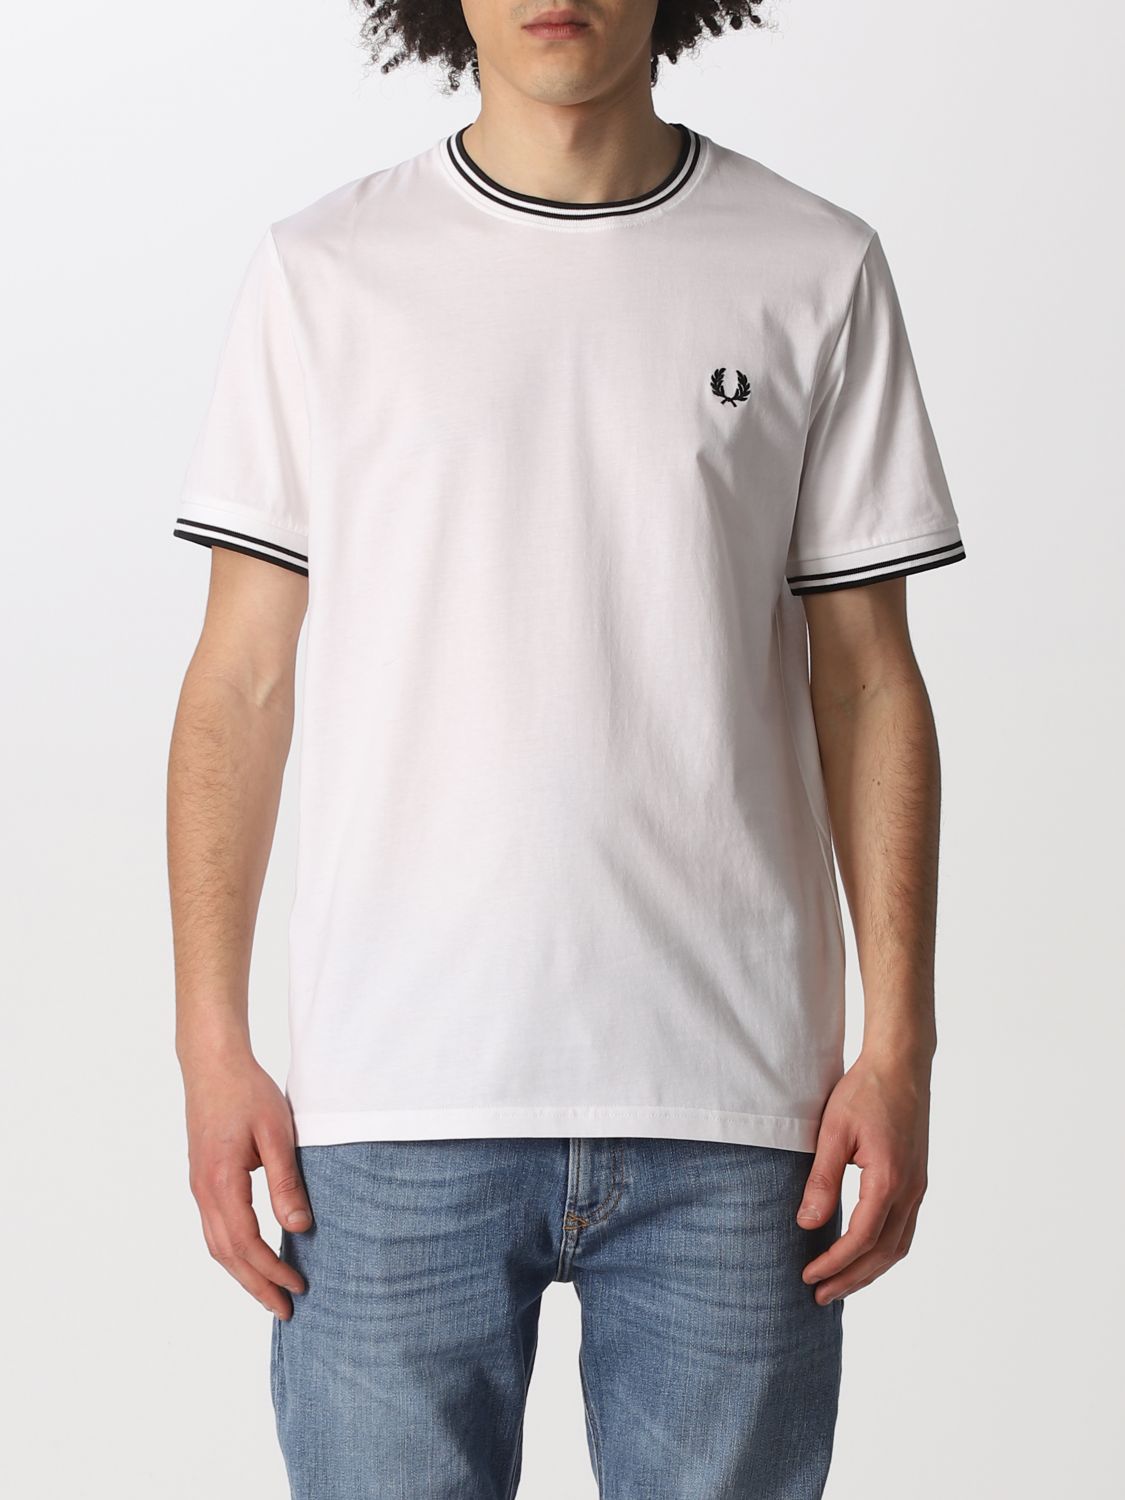 Tシャツ Fred Perry: Tシャツ メンズ Fred Perry ホワイト 1